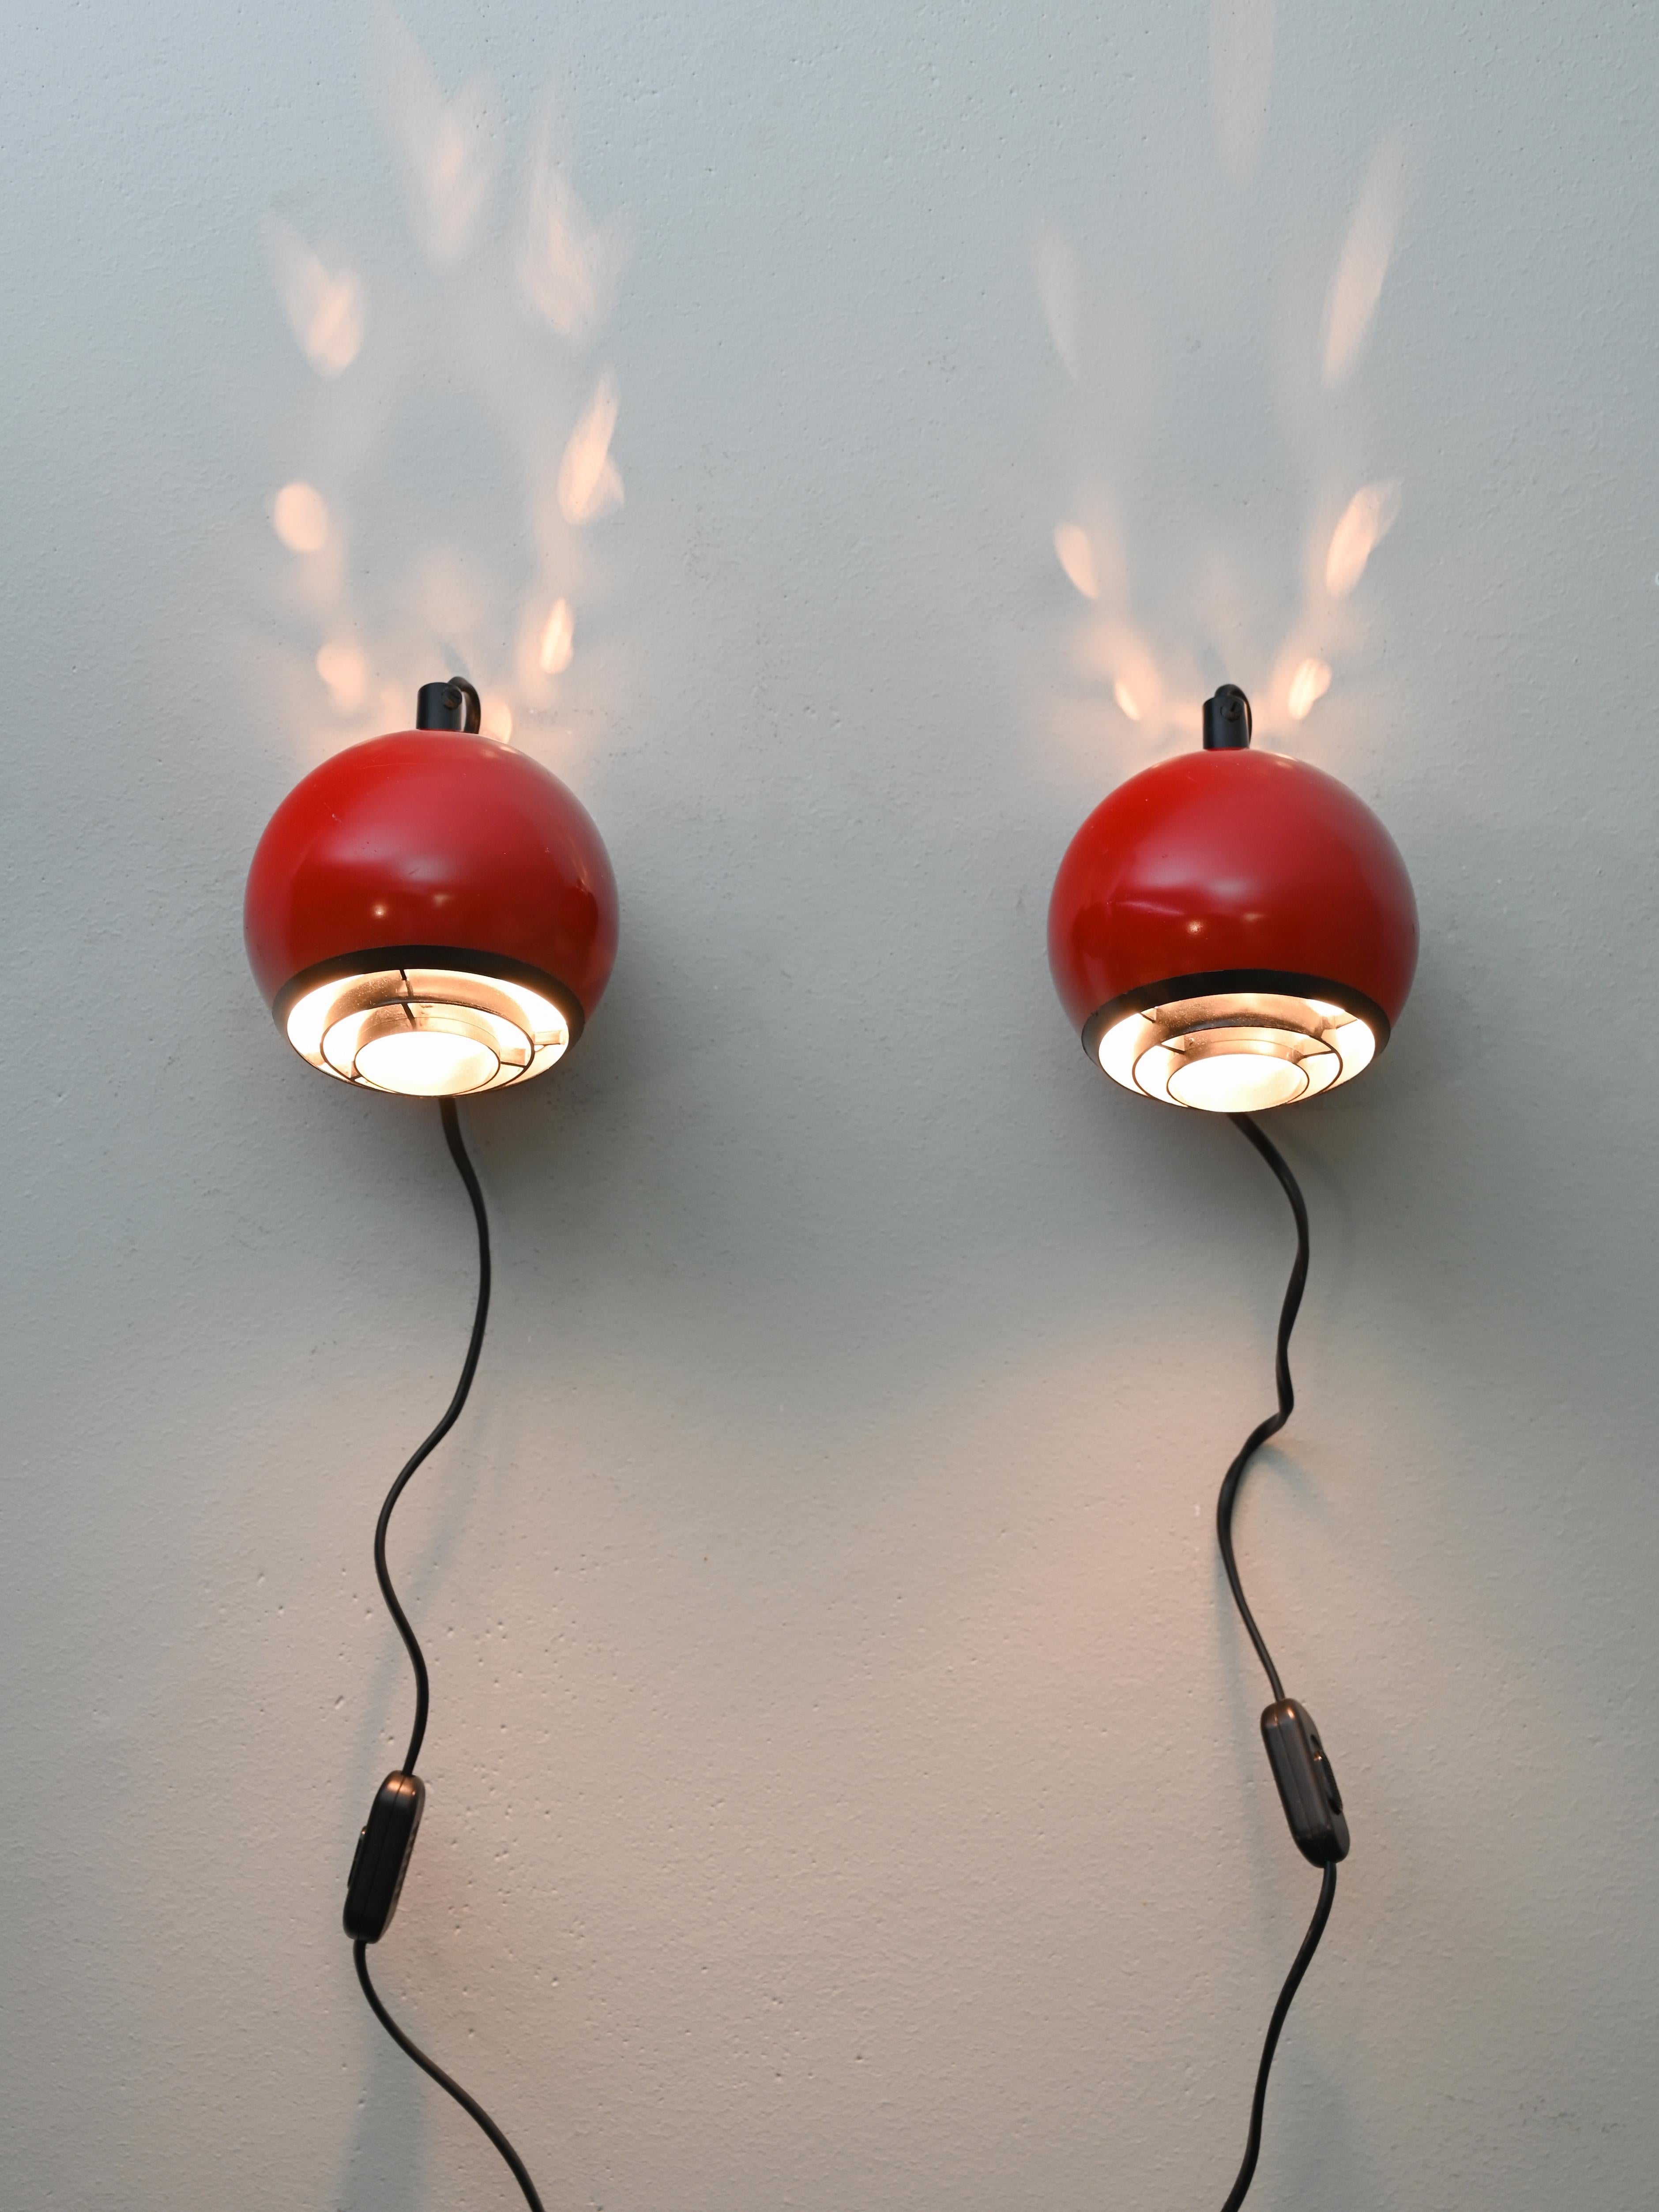 Pair of original 1960s metal and plastic wall lamps.
These original vintage lamps trace the mid-century modern style. The round lampshade
features a black plastic grid that filters and diffuses light evenly.
Ideal for use in the bedroom, they